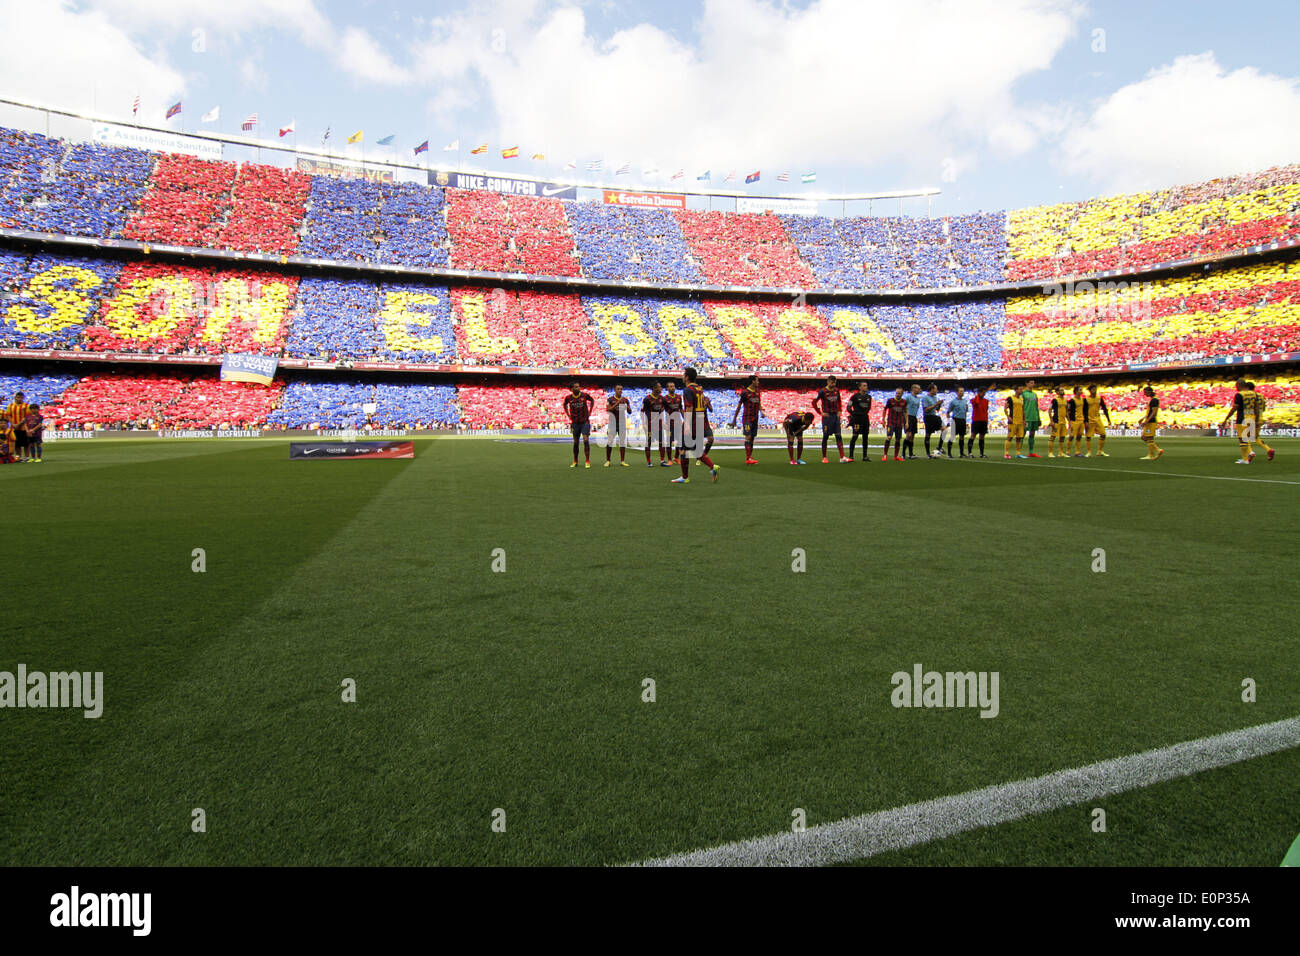 Barcelona, Spain. 17th May, 2014. catalan supporters in the match between FC Barcelona and Atletico de Madrid, for Week 38 of the spanish Liga BBVA played at the Camp Nou, May 17, 2014. Photo: Joan Valls/Urbanandsport/Nurphoto. Credit:  Joan Valls/NurPhoto/ZUMAPRESS.com/Alamy Live News Stock Photo